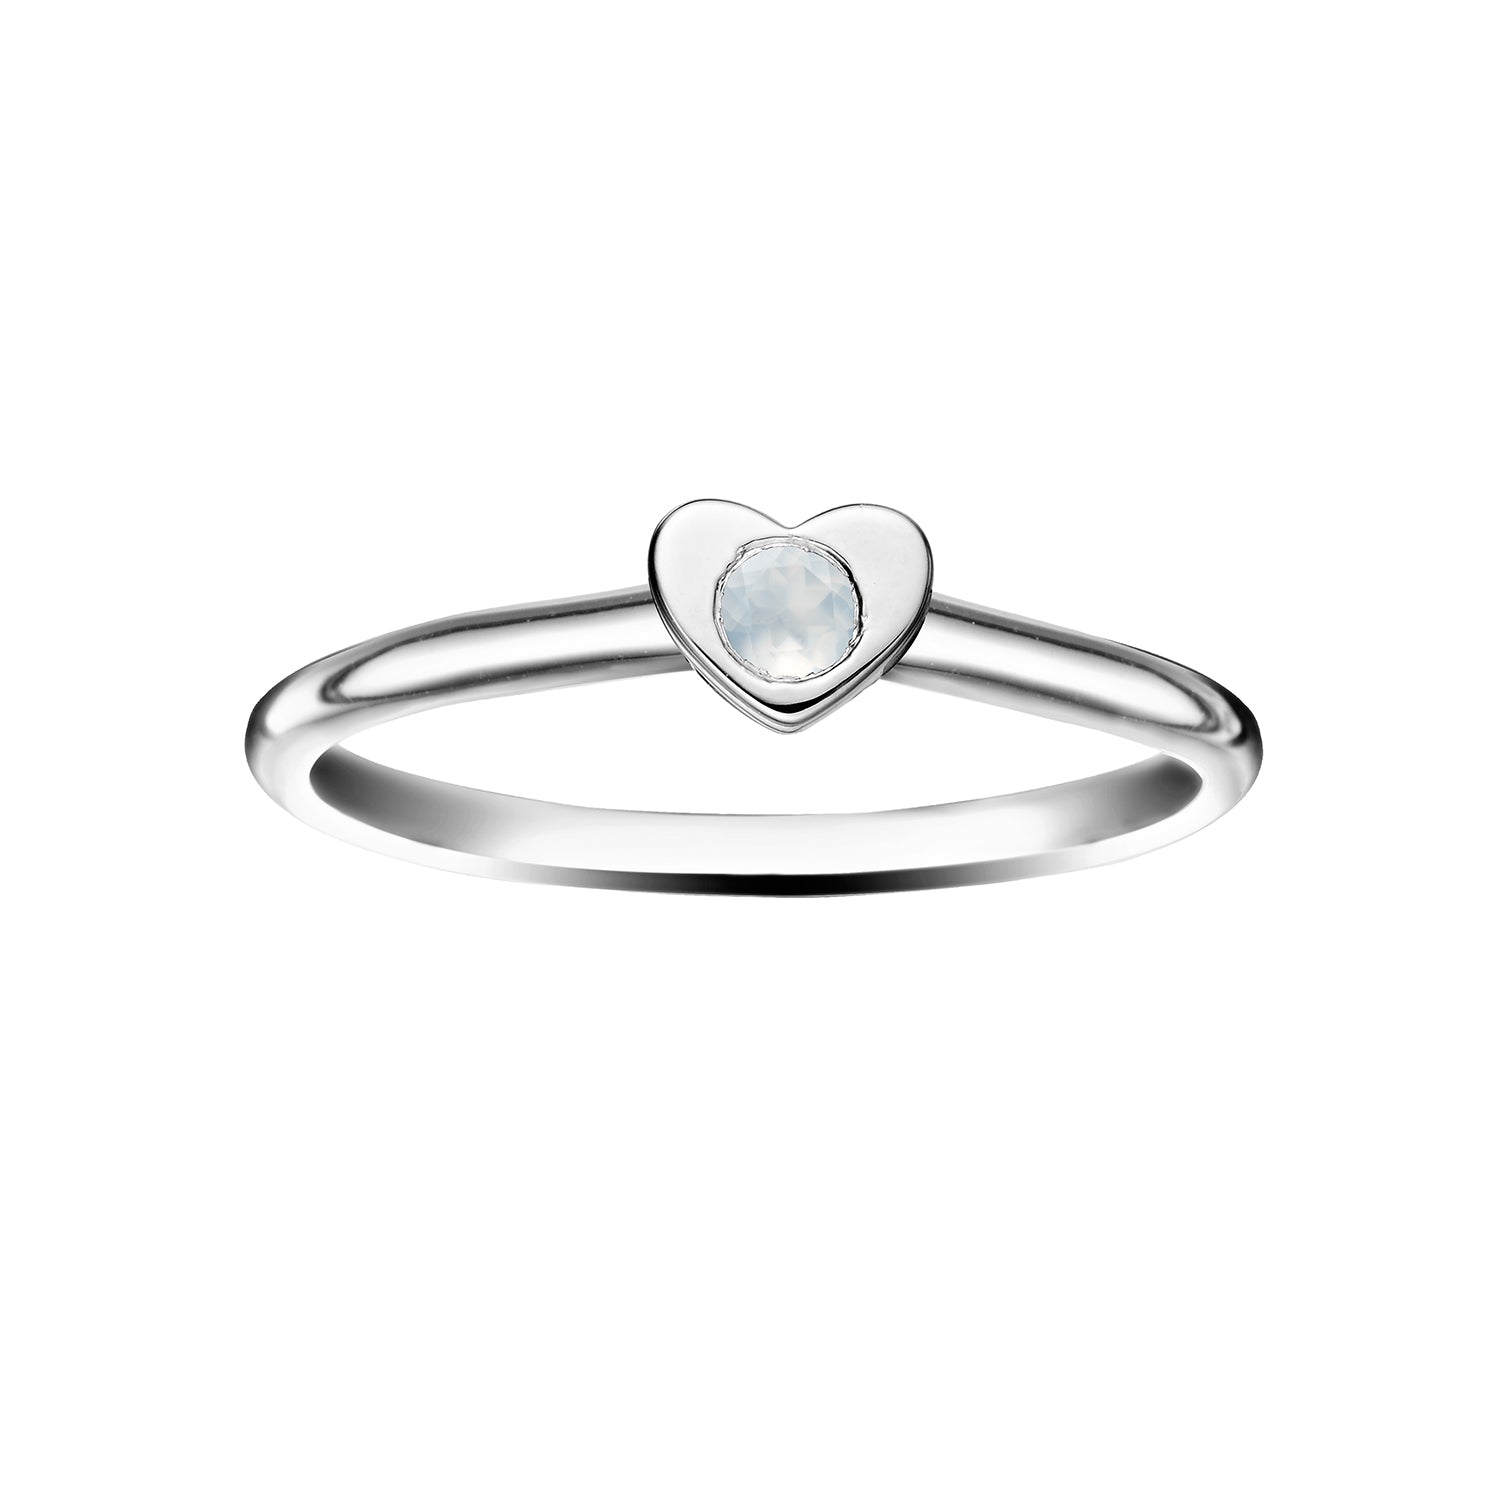 Polished Silver Heart Stacking Birthstone Rings - June / Moonstone